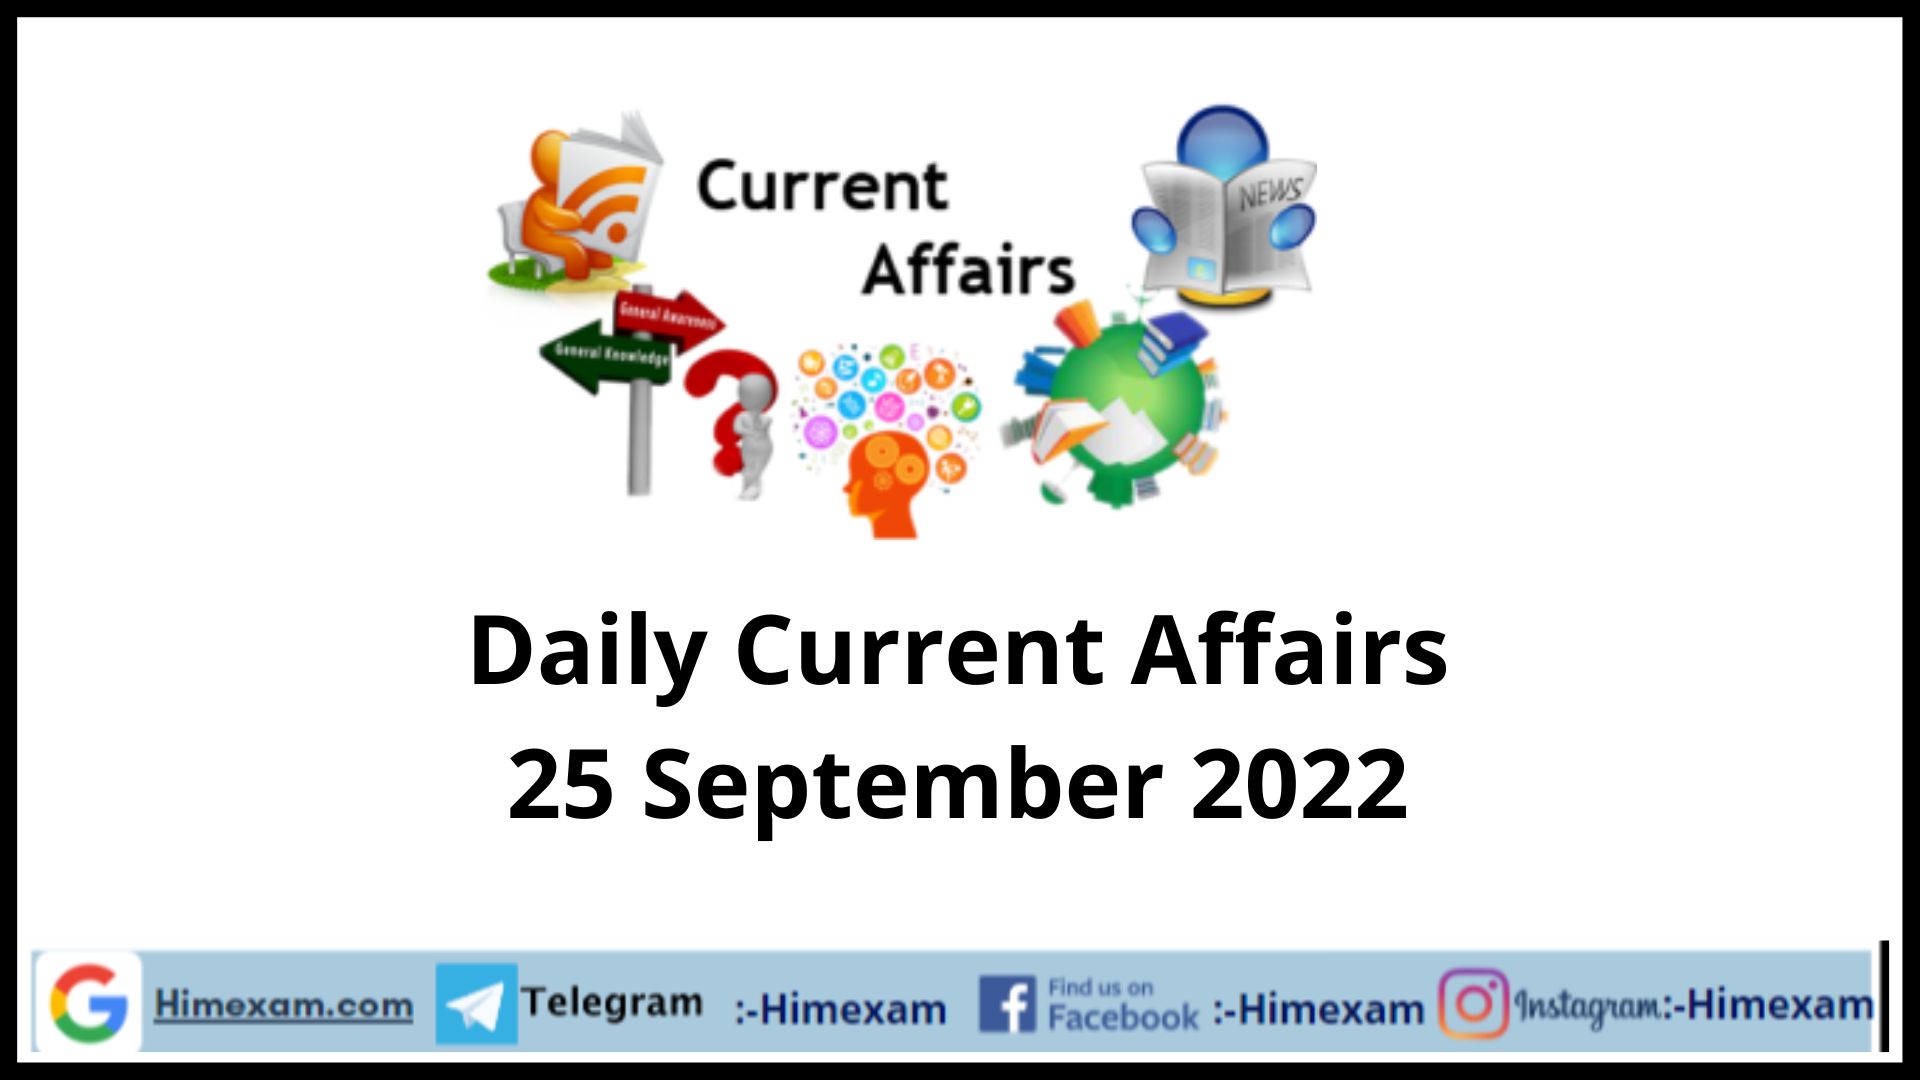 Daily Current Affairs 25 September 2022